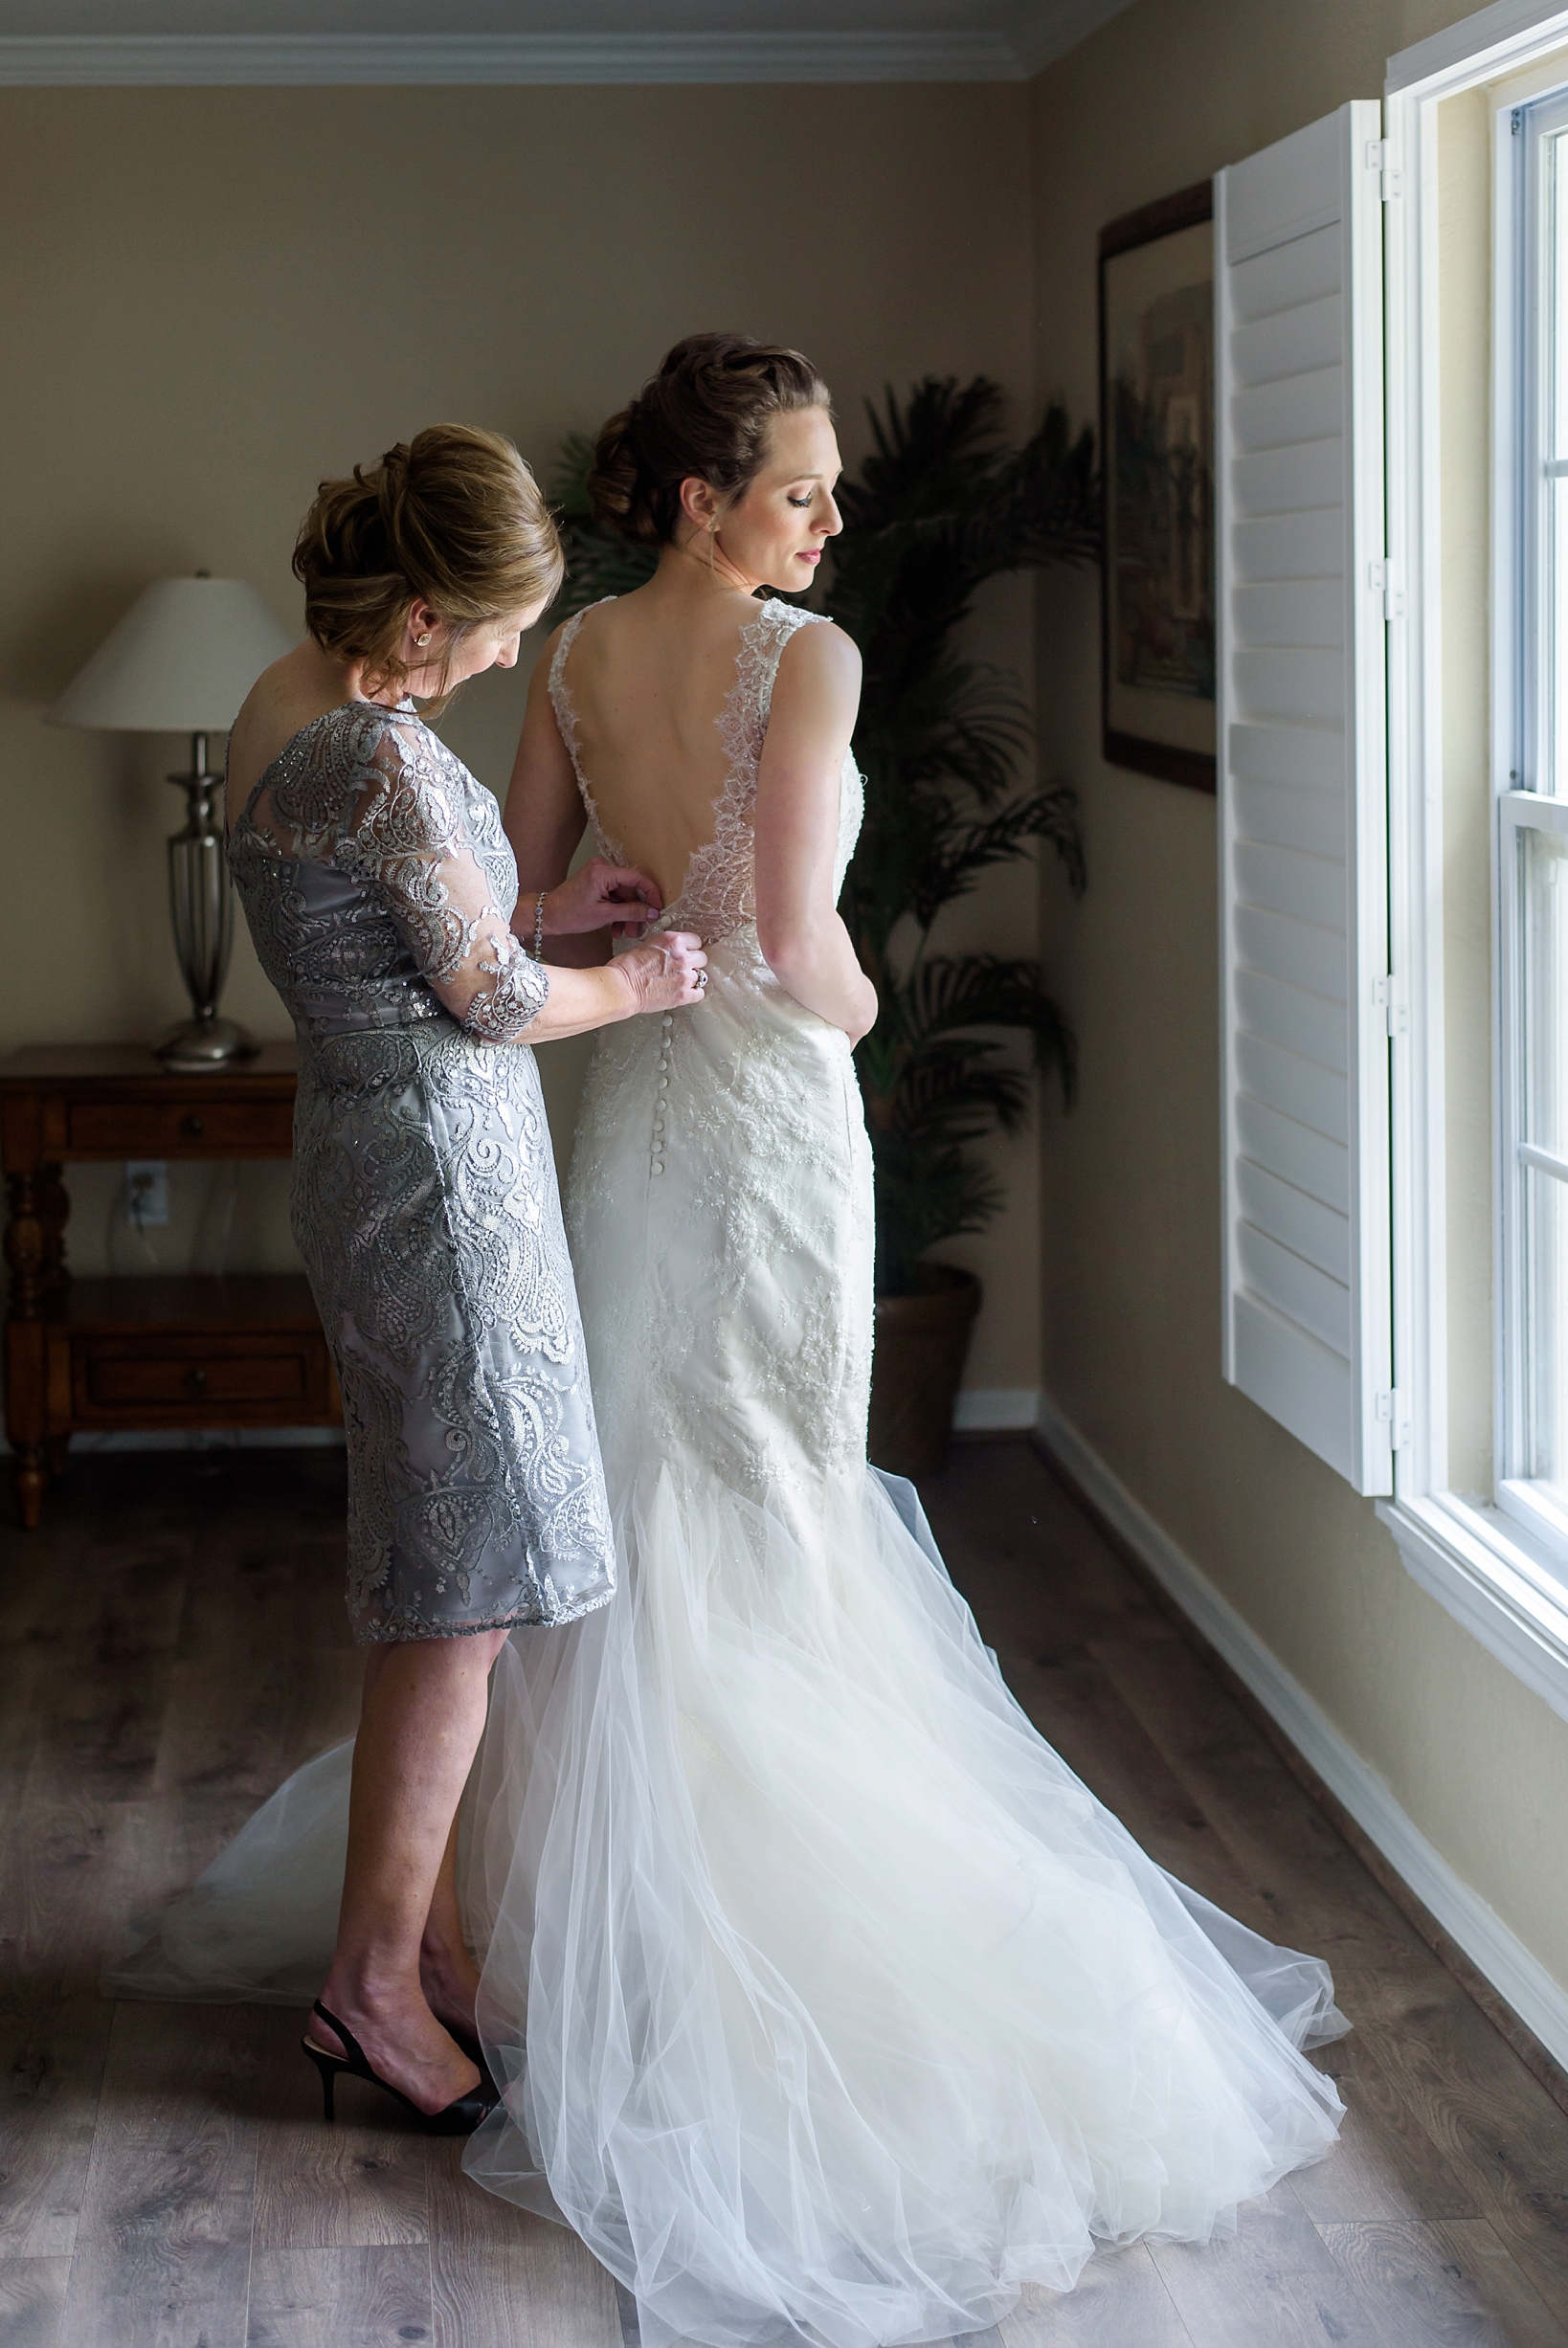 Mother of the bride helping her daughter into her wedding dress by Sarah & Ben Photography